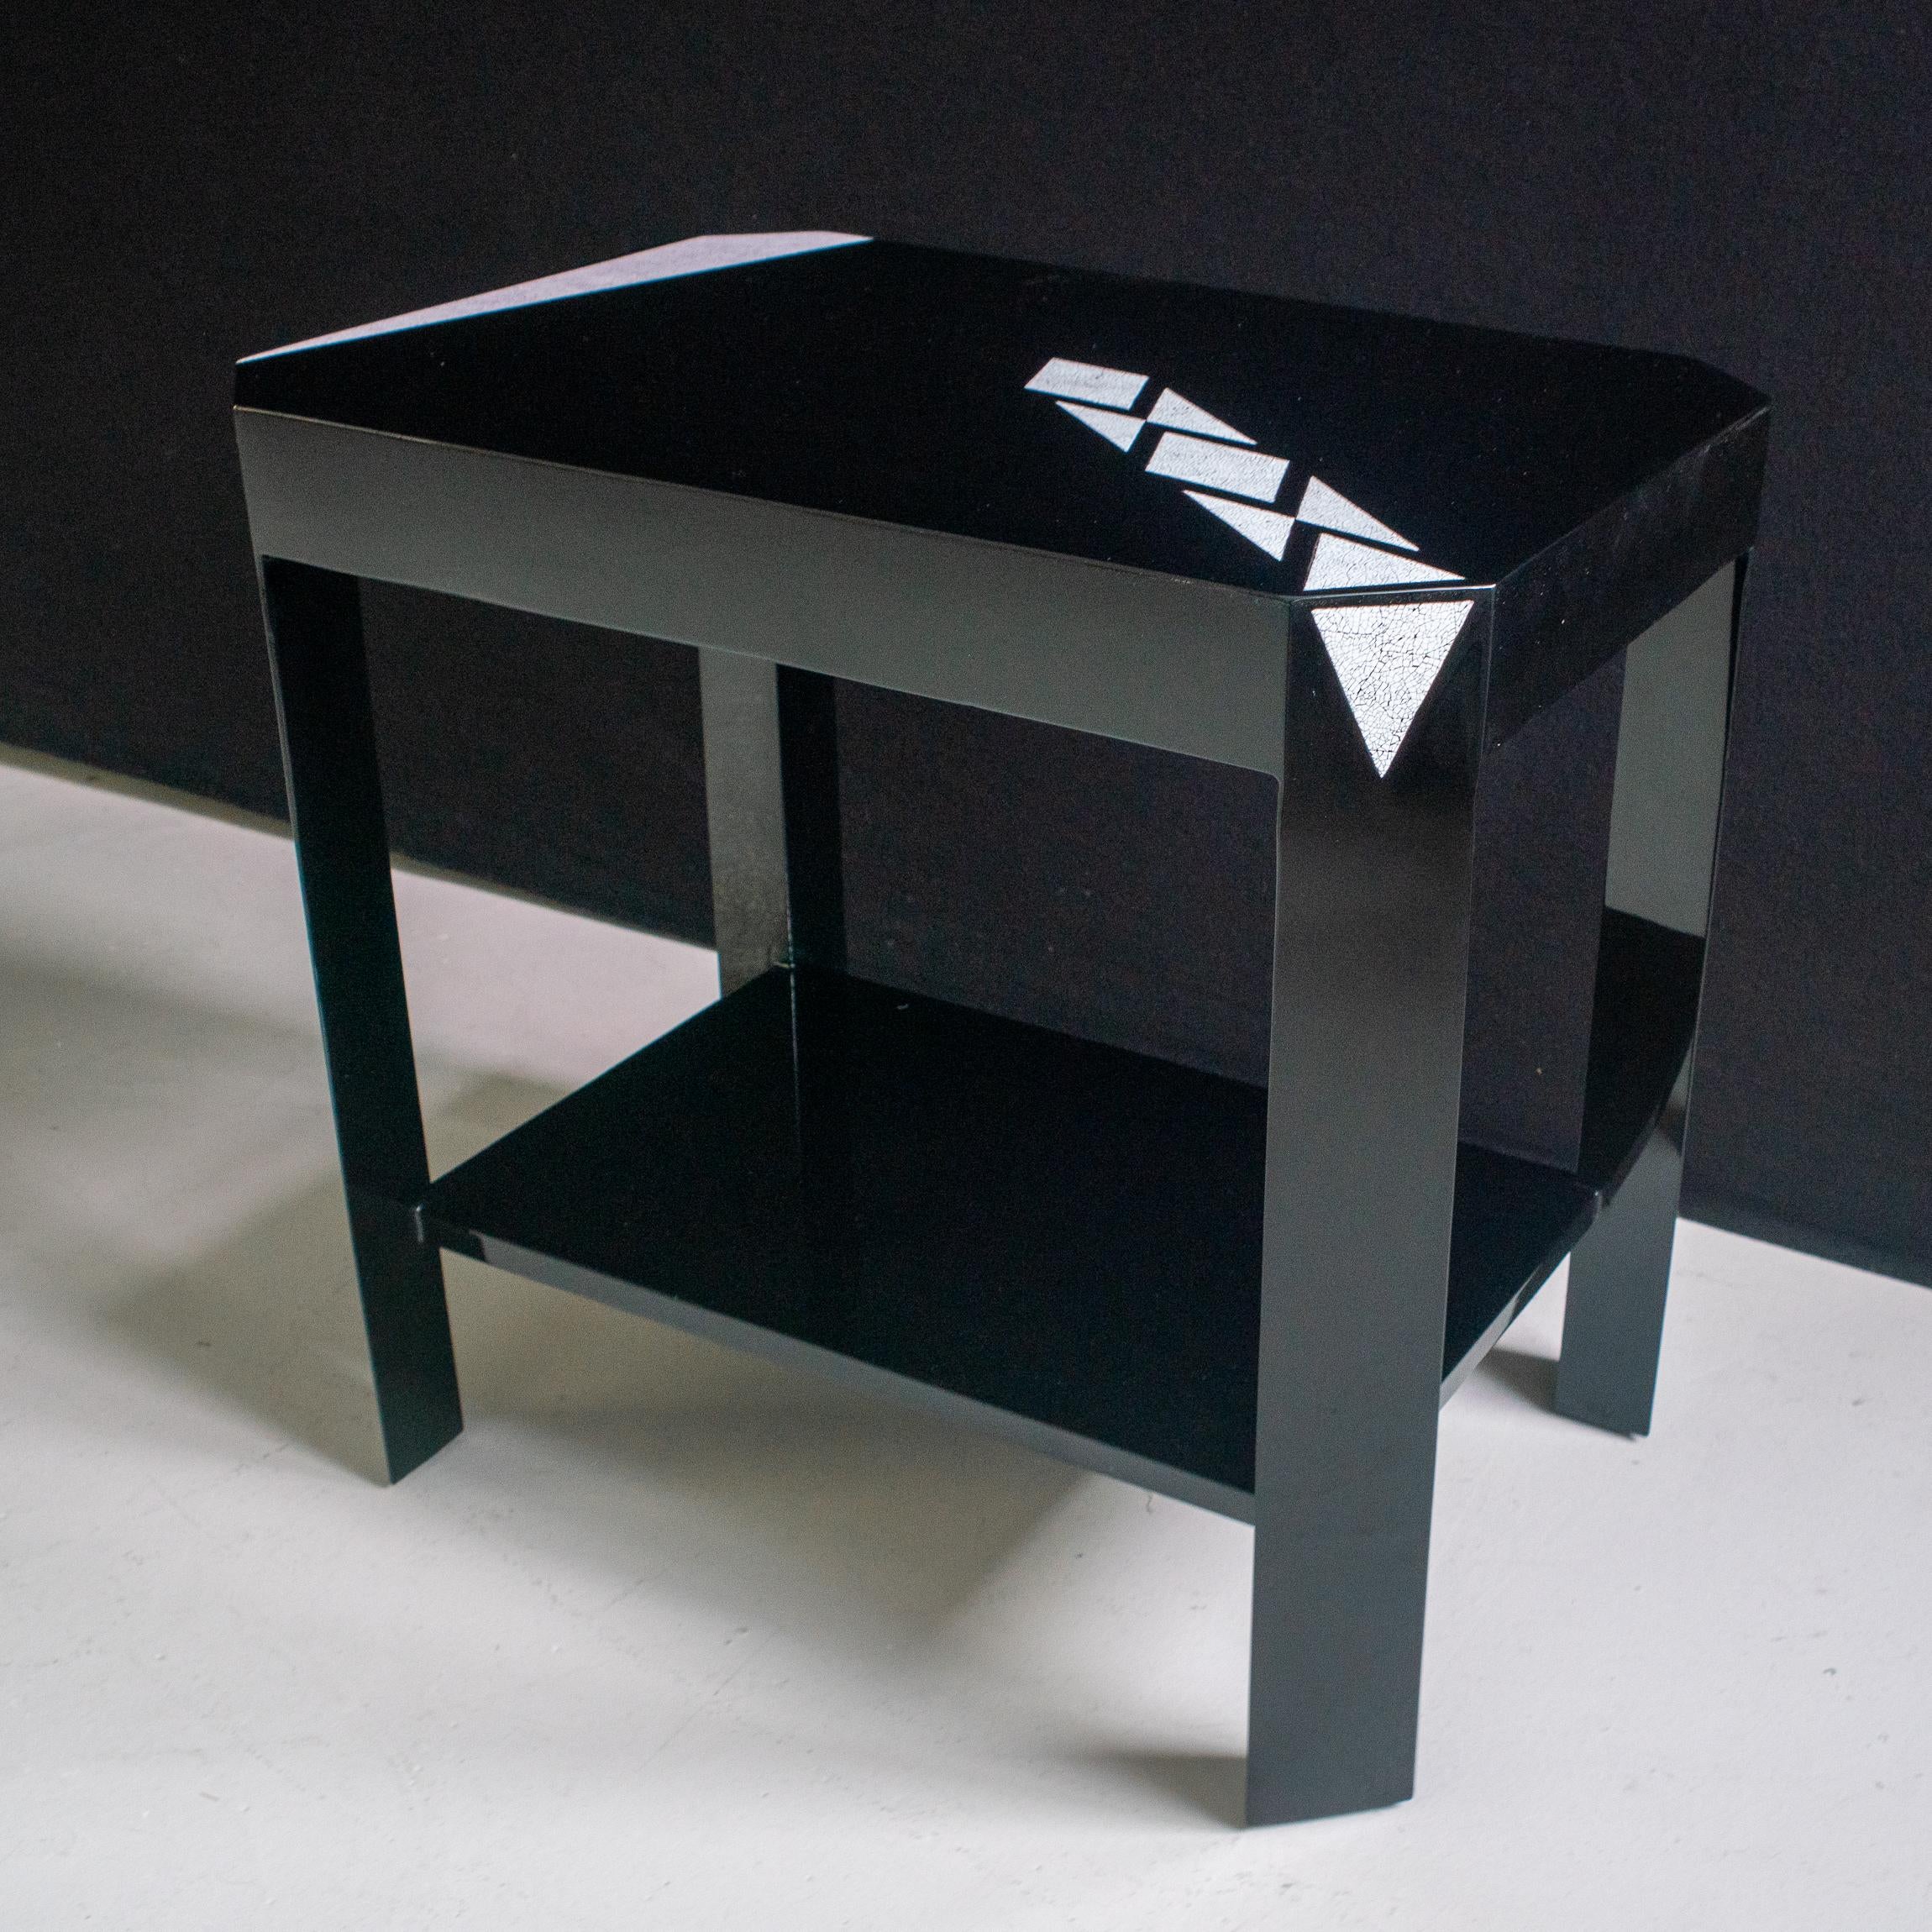 Two level side pair of side tables in black lacquer with sober eggshell design.